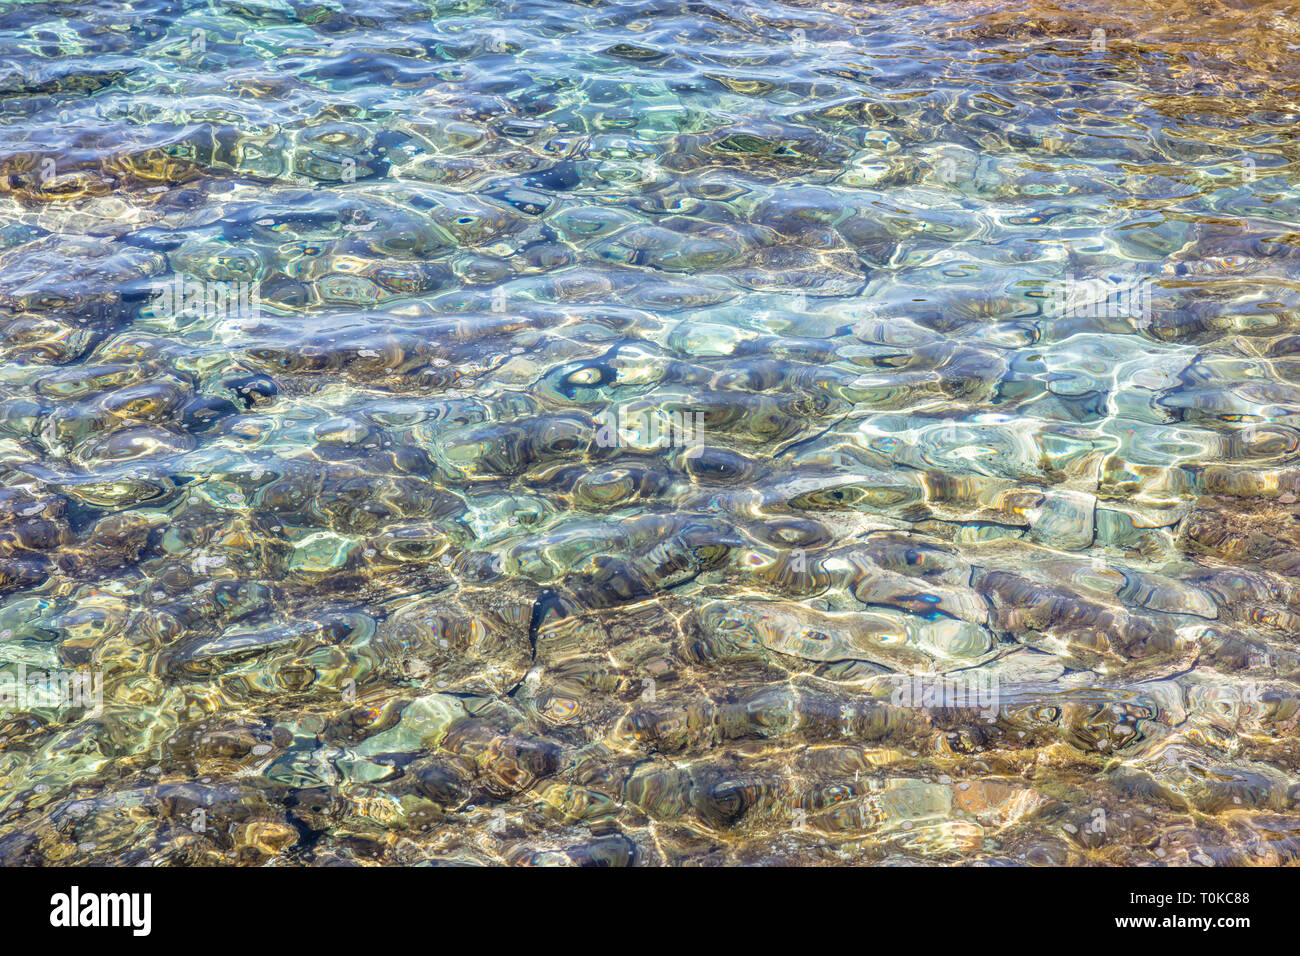 Clear crystal shallow blue sea water and rocky seabed background, high angle view Stock Photo